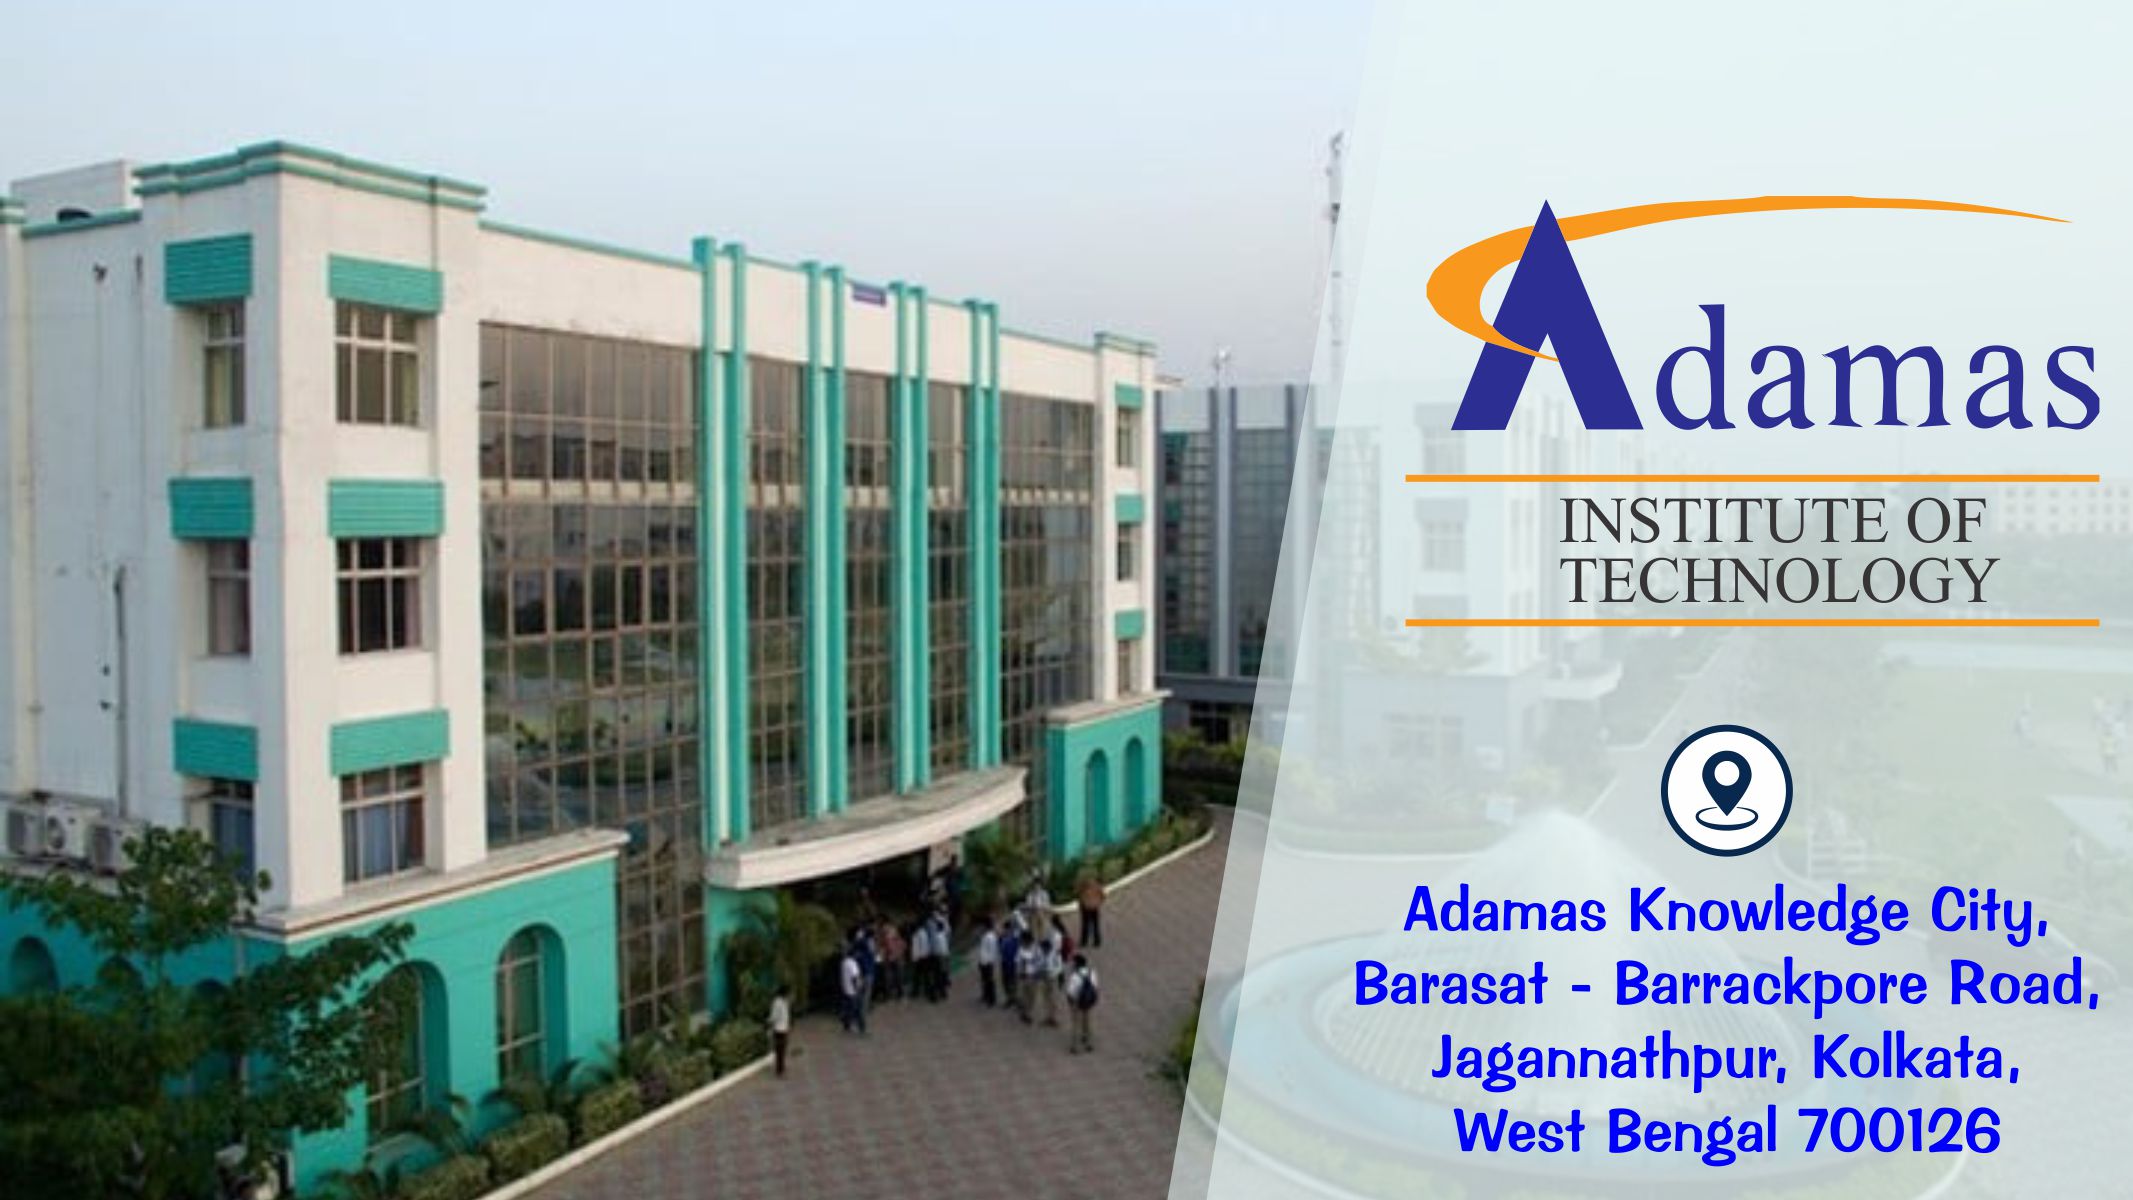 Out Side View of Adamas Institute of Technology